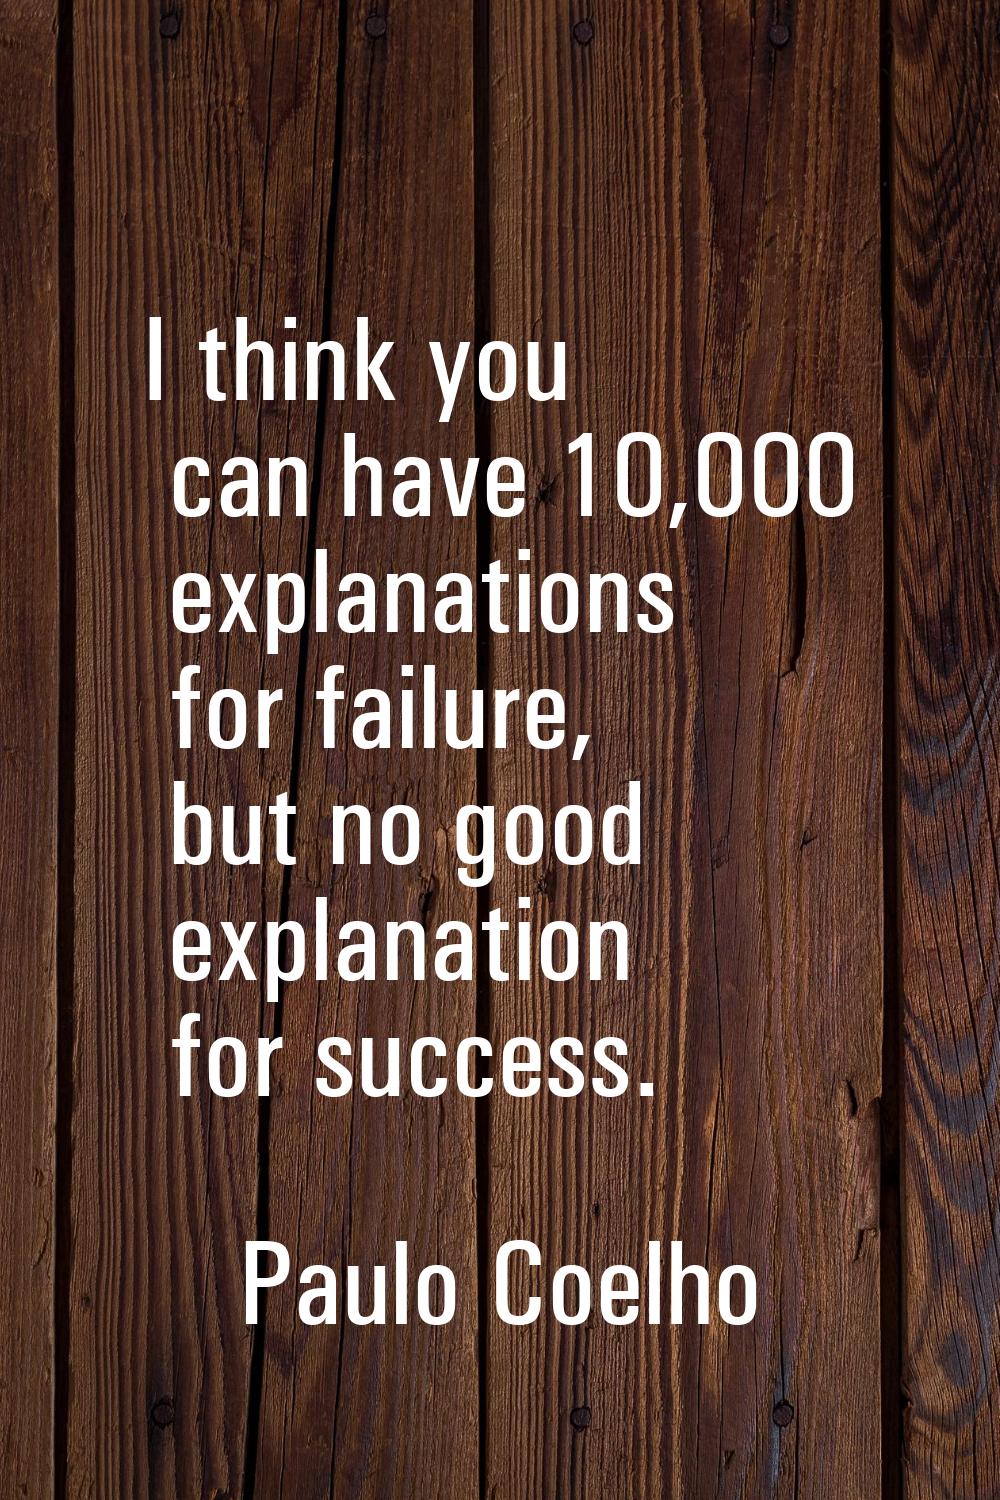 I think you can have 10,000 explanations for failure, but no good explanation for success.